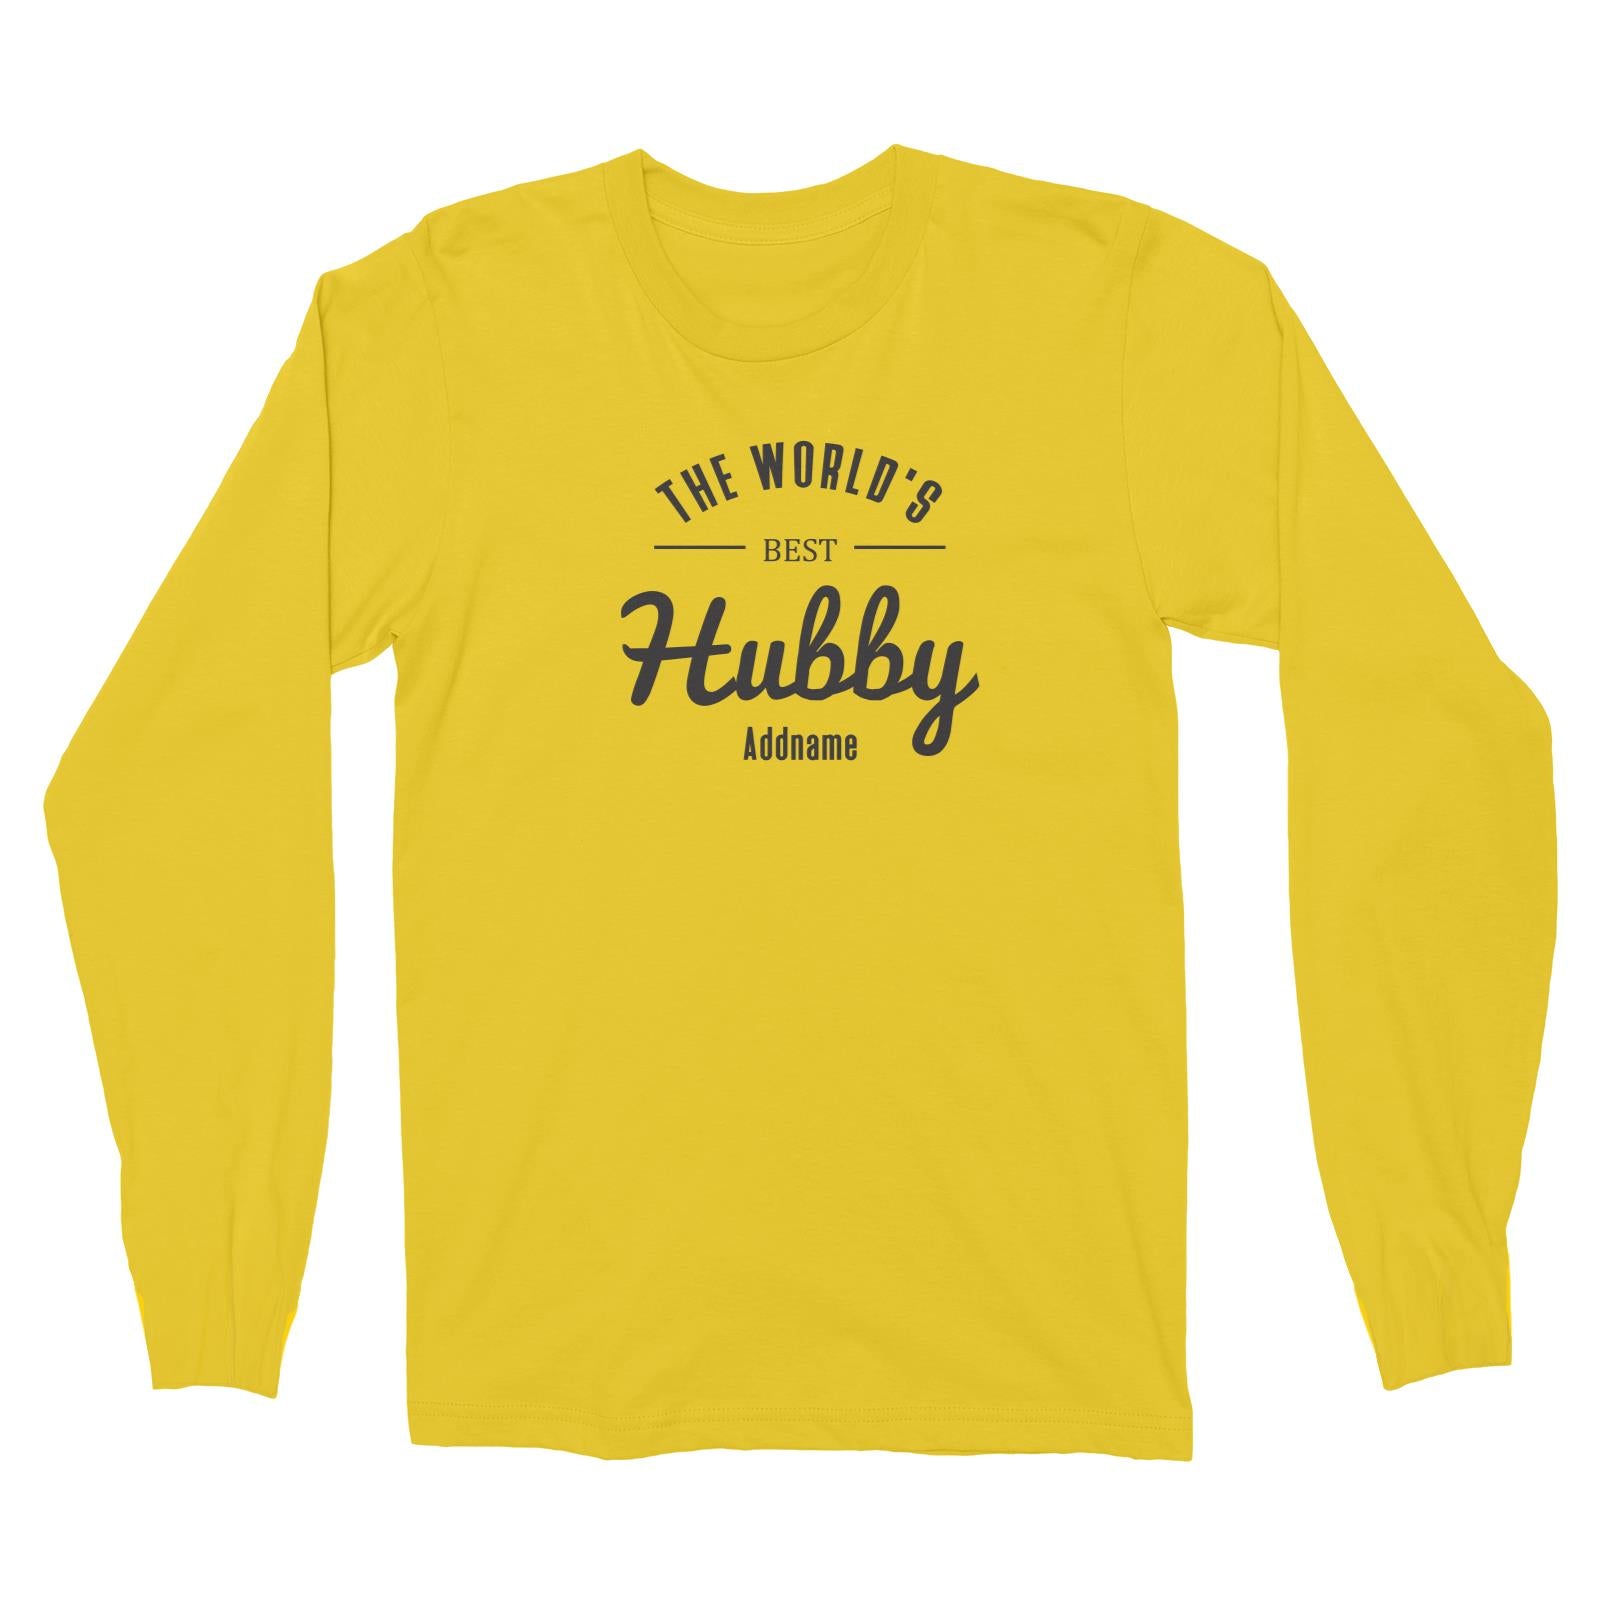 Husband and Wife The World's Best Hubby Addname Long Sleeve Unisex T-Shirt